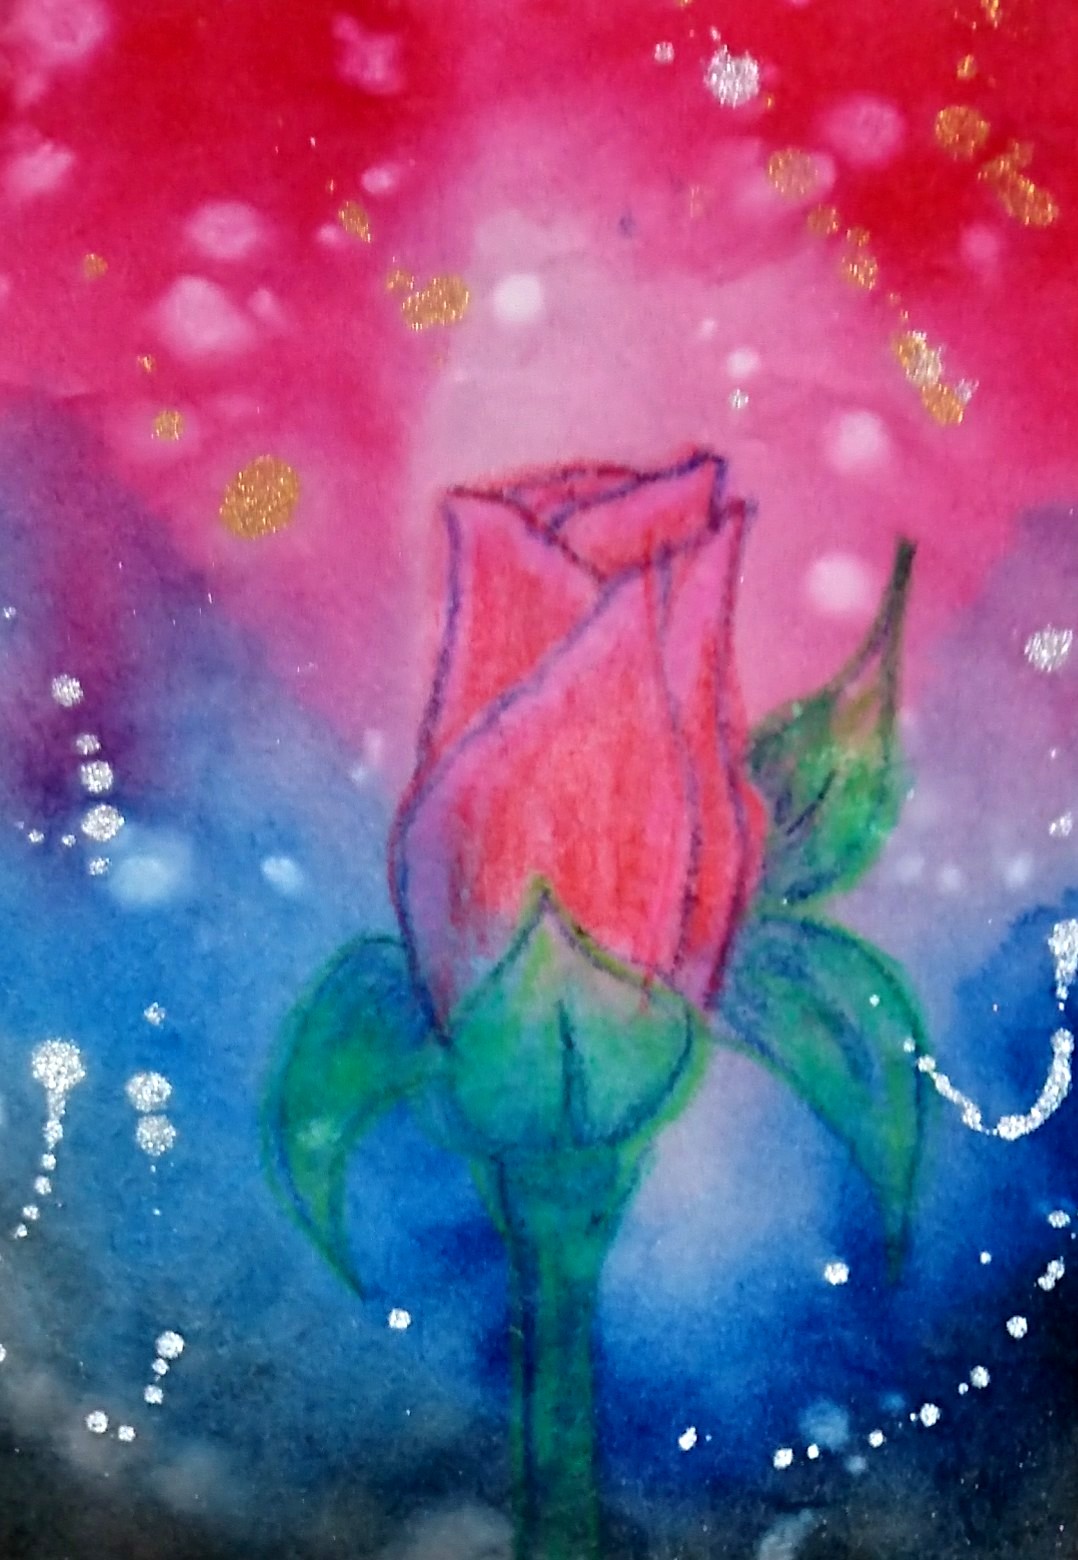 Minoriart 小休止中 薔薇 Rose 蕾 Bud 水彩 Watercolor Watercolorpainting アート Art Drawing Artworks 色鉛筆 Colorpencil T Co Xqfrr5tbv5 Twitter